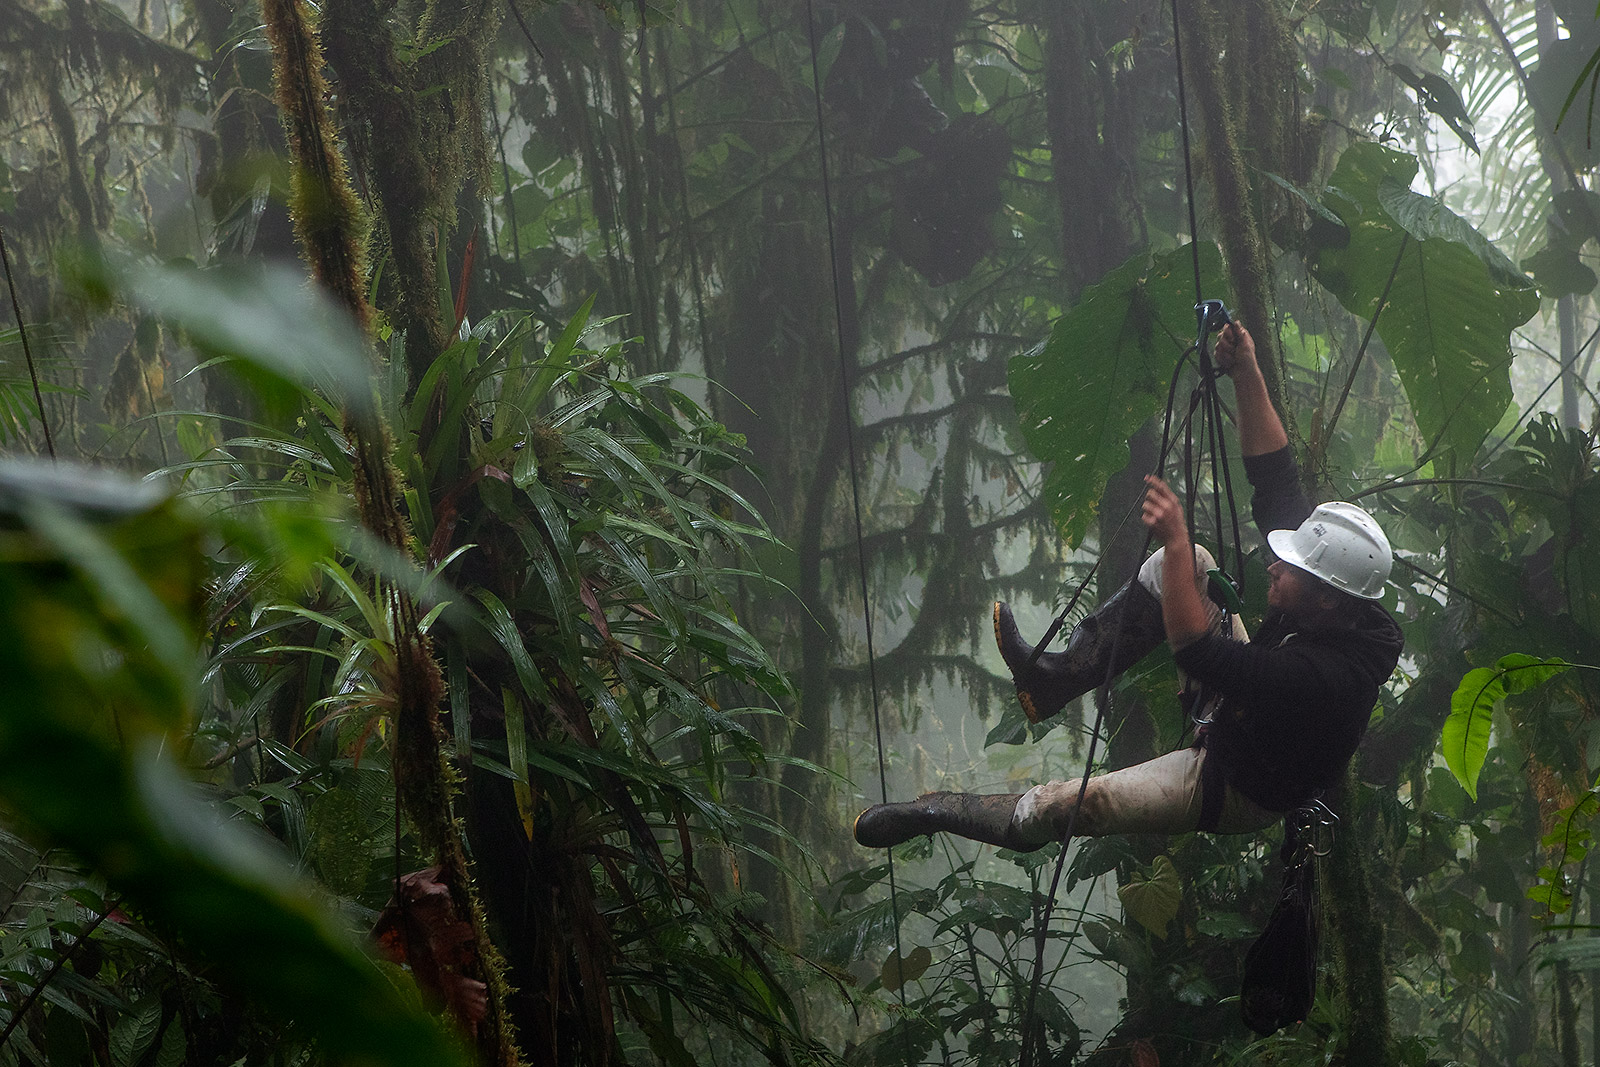 Field biologist Jose Vieira climbs to the cloud forest canopy in search of lizards